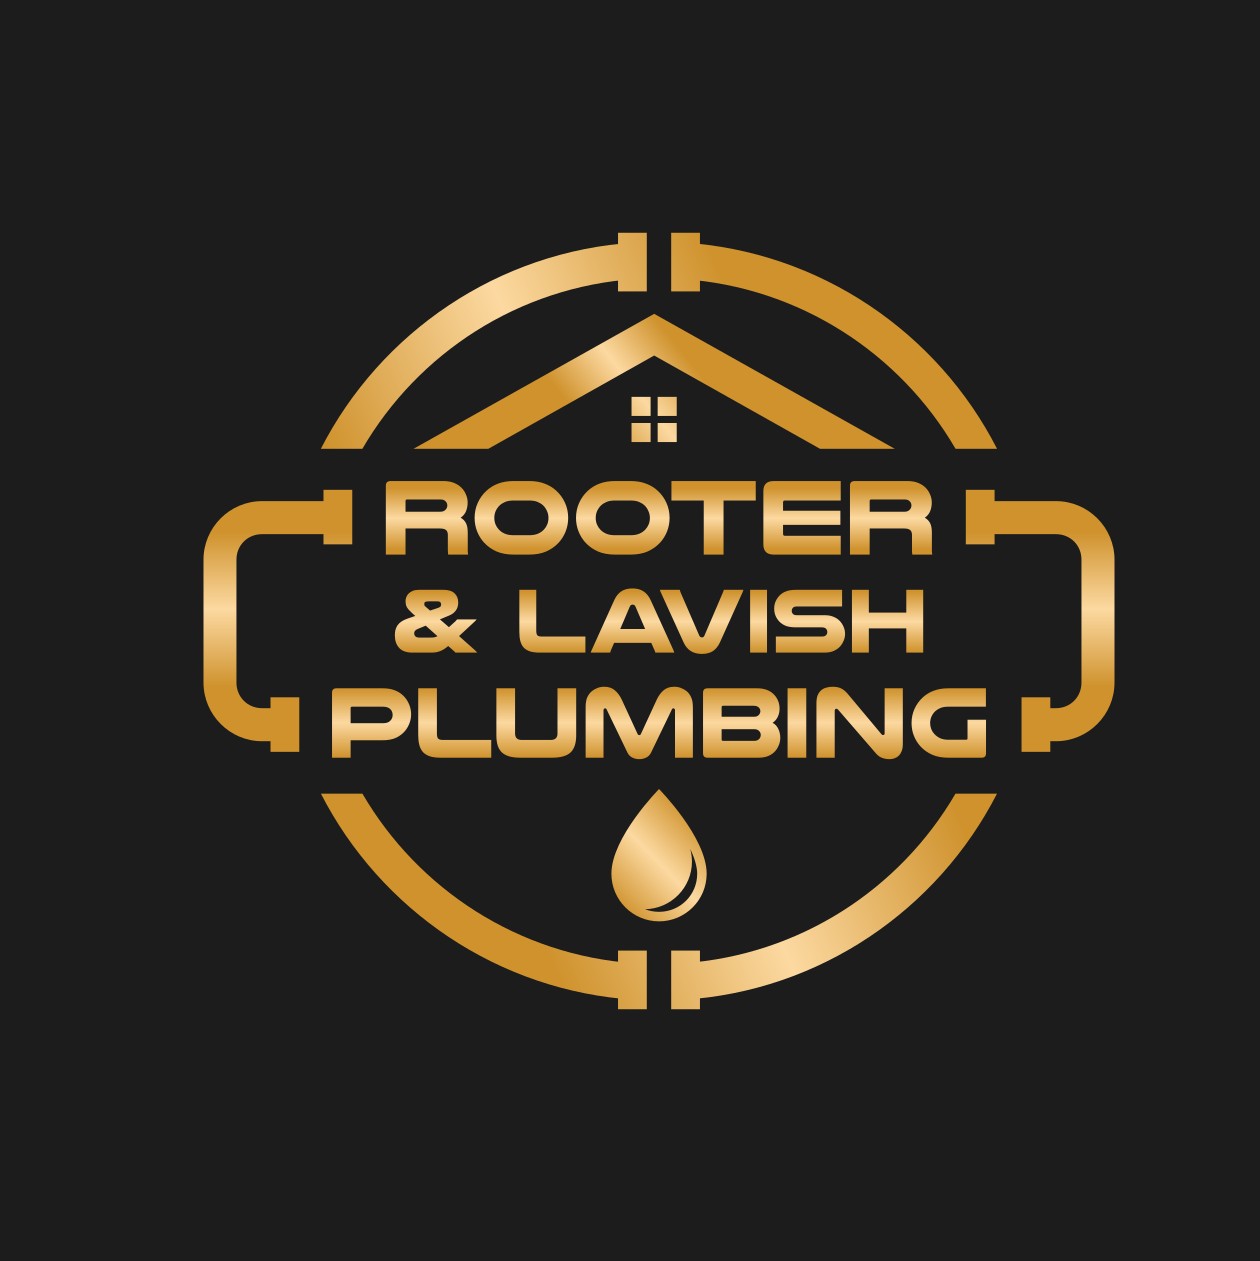 Rooter and Lavish Plumbing-Unlicensed Contractor Logo